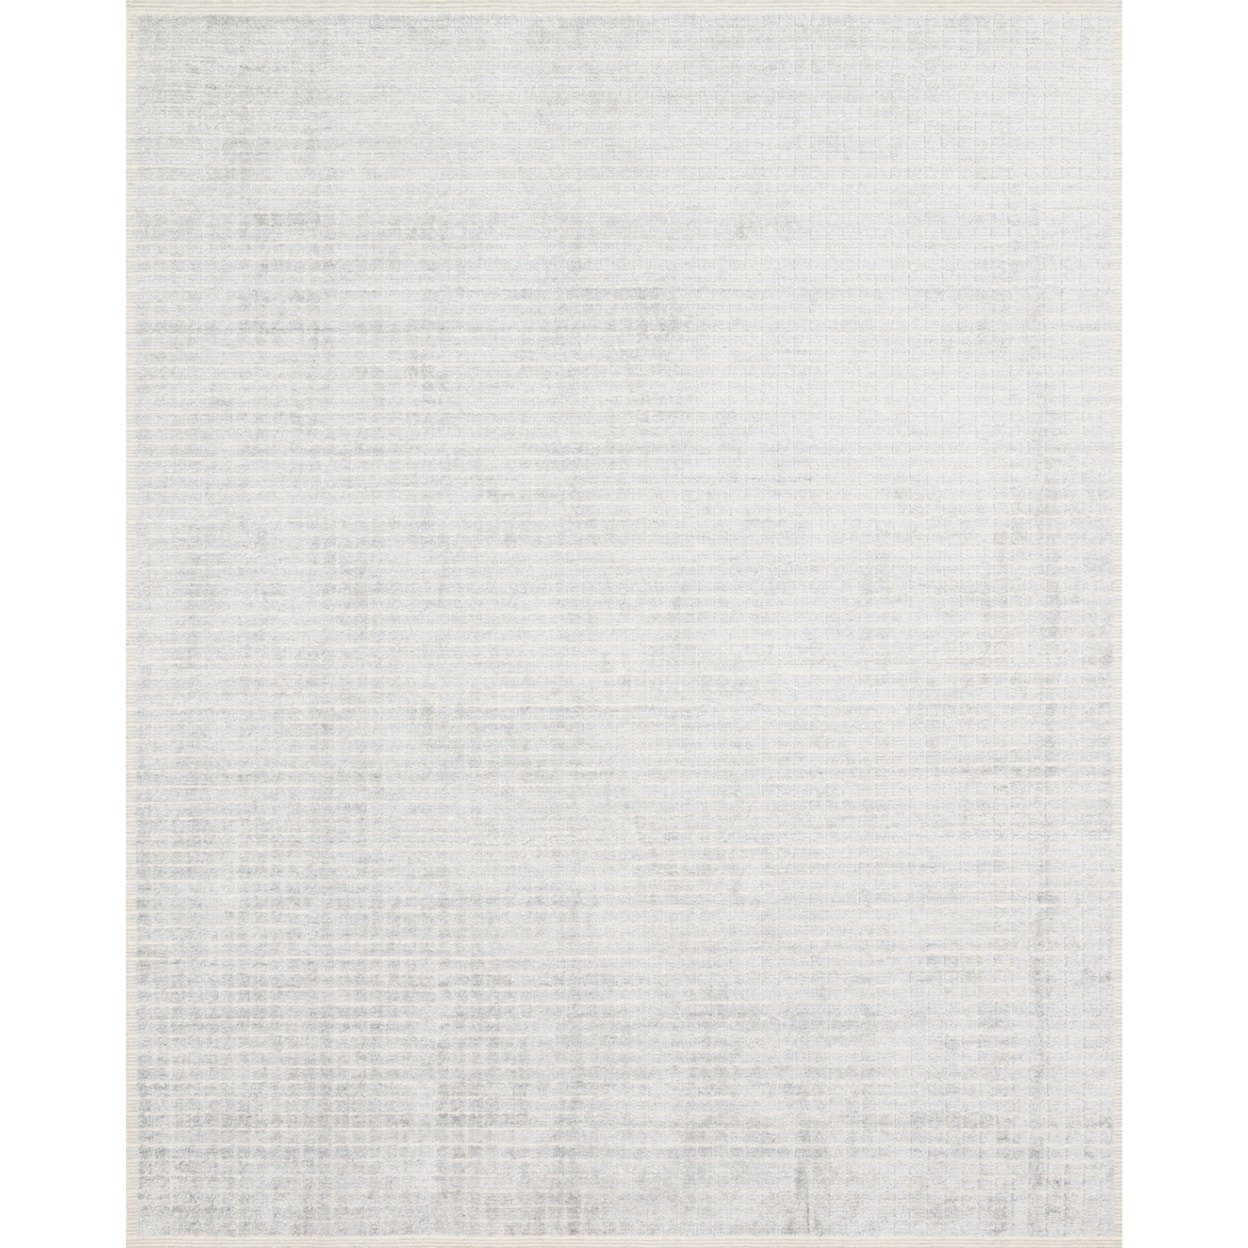 Reeds Rugs Beverly 2'0" x 3'0" Silver / Sky Rug